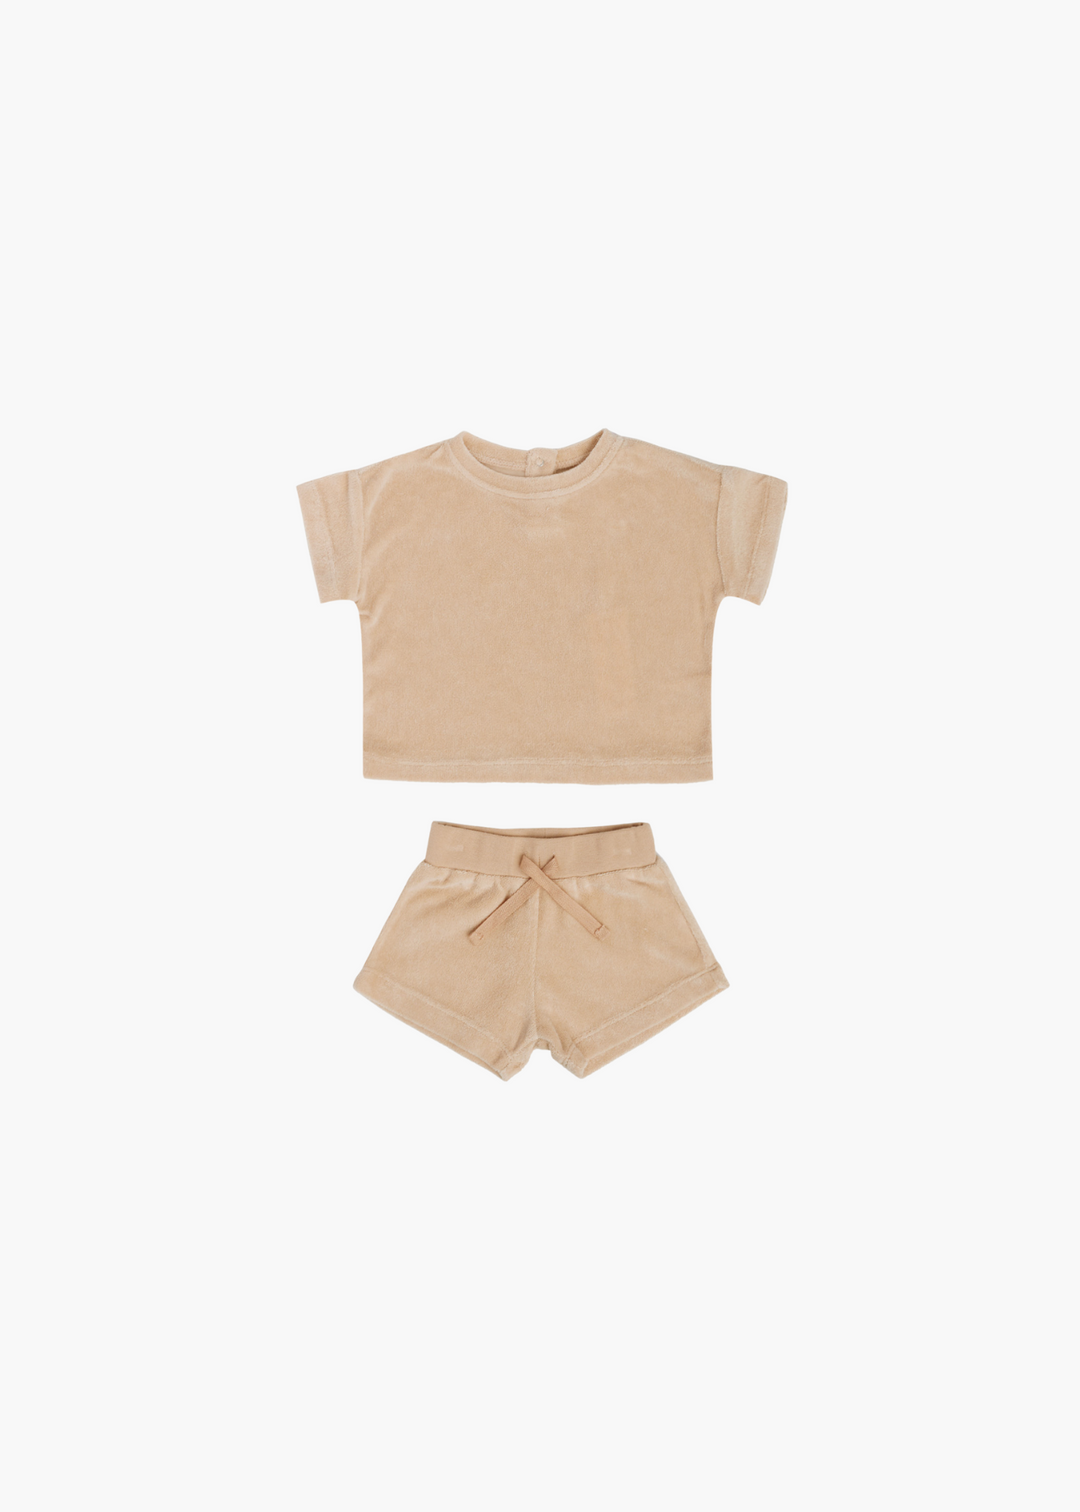 terry tee & shorts set | apricot - FINAL SALE